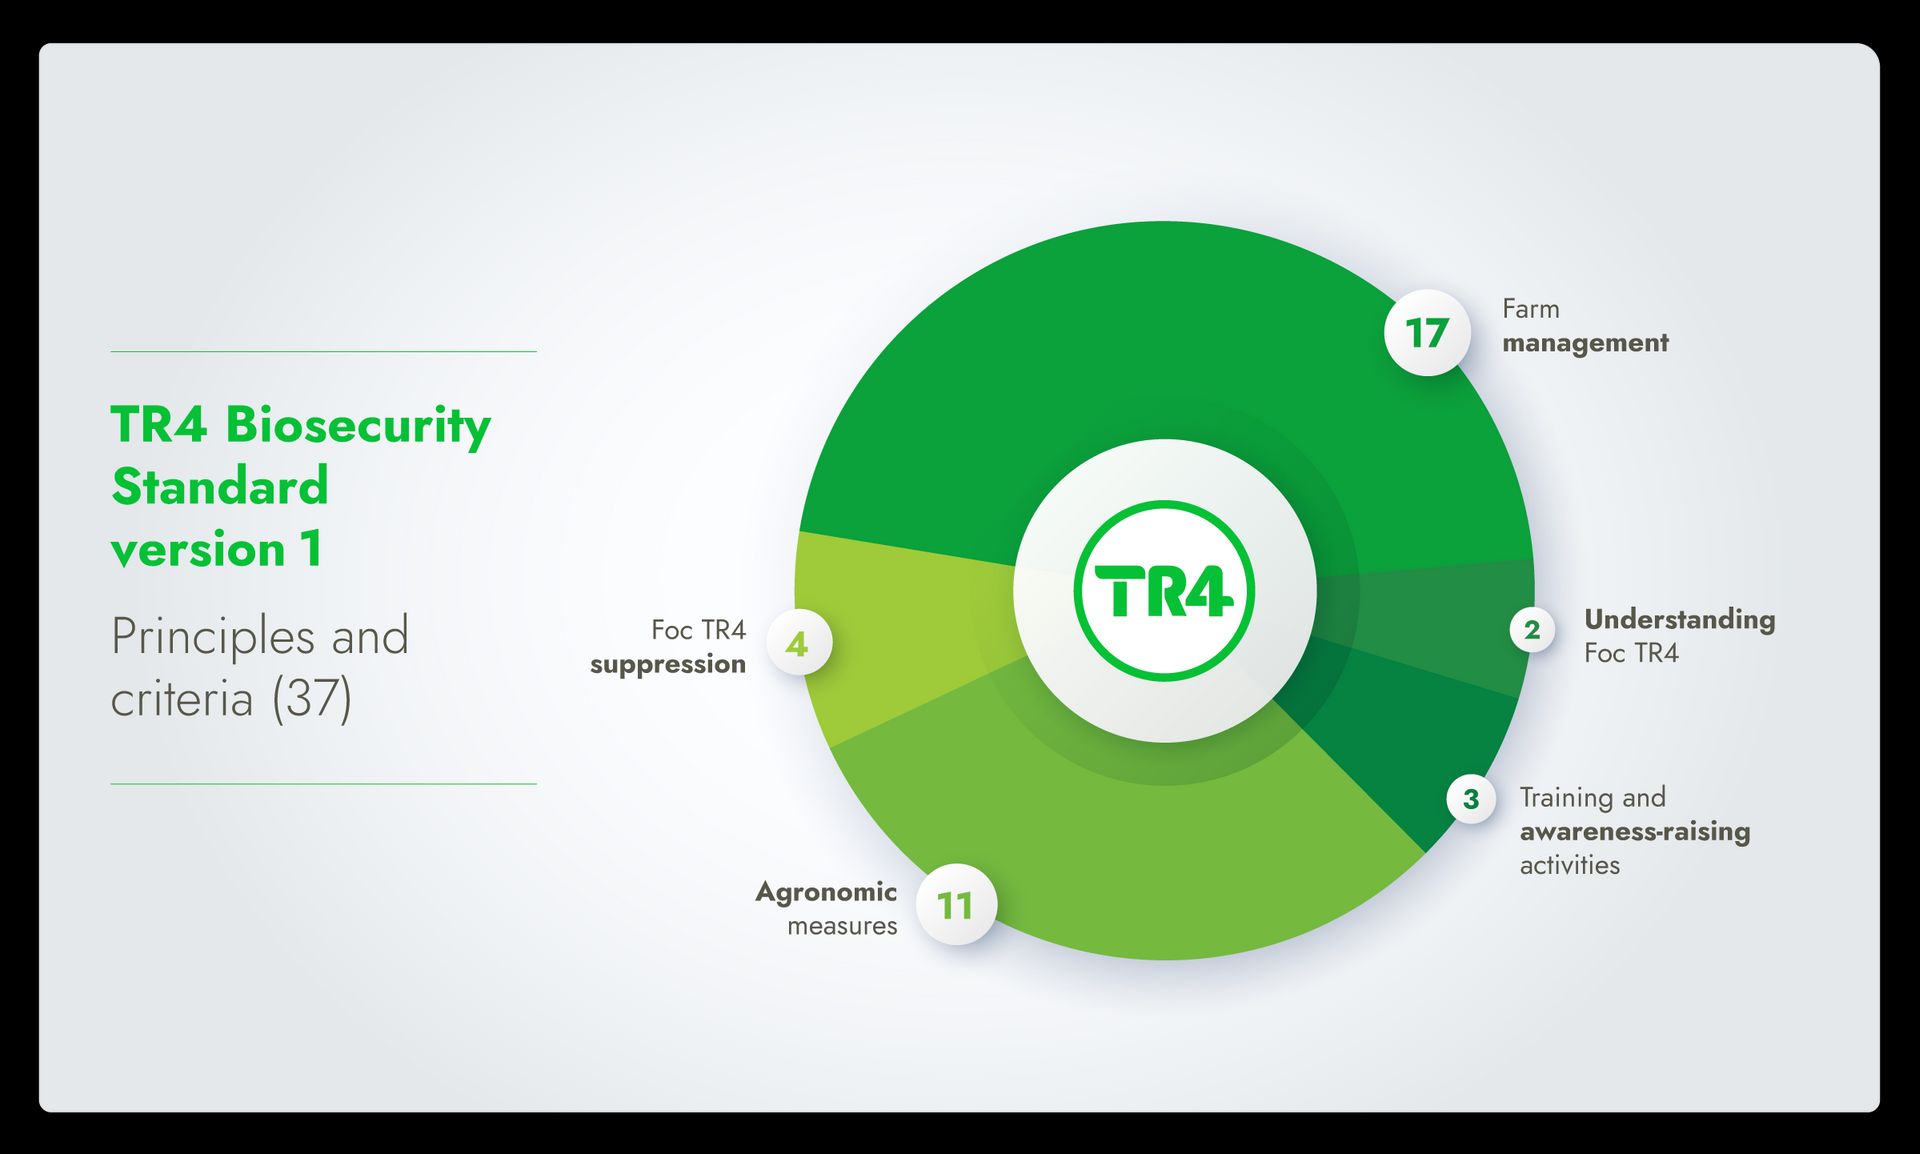 Infographic showing the principles and criteria of the TR4 Biosecurity standard version 1